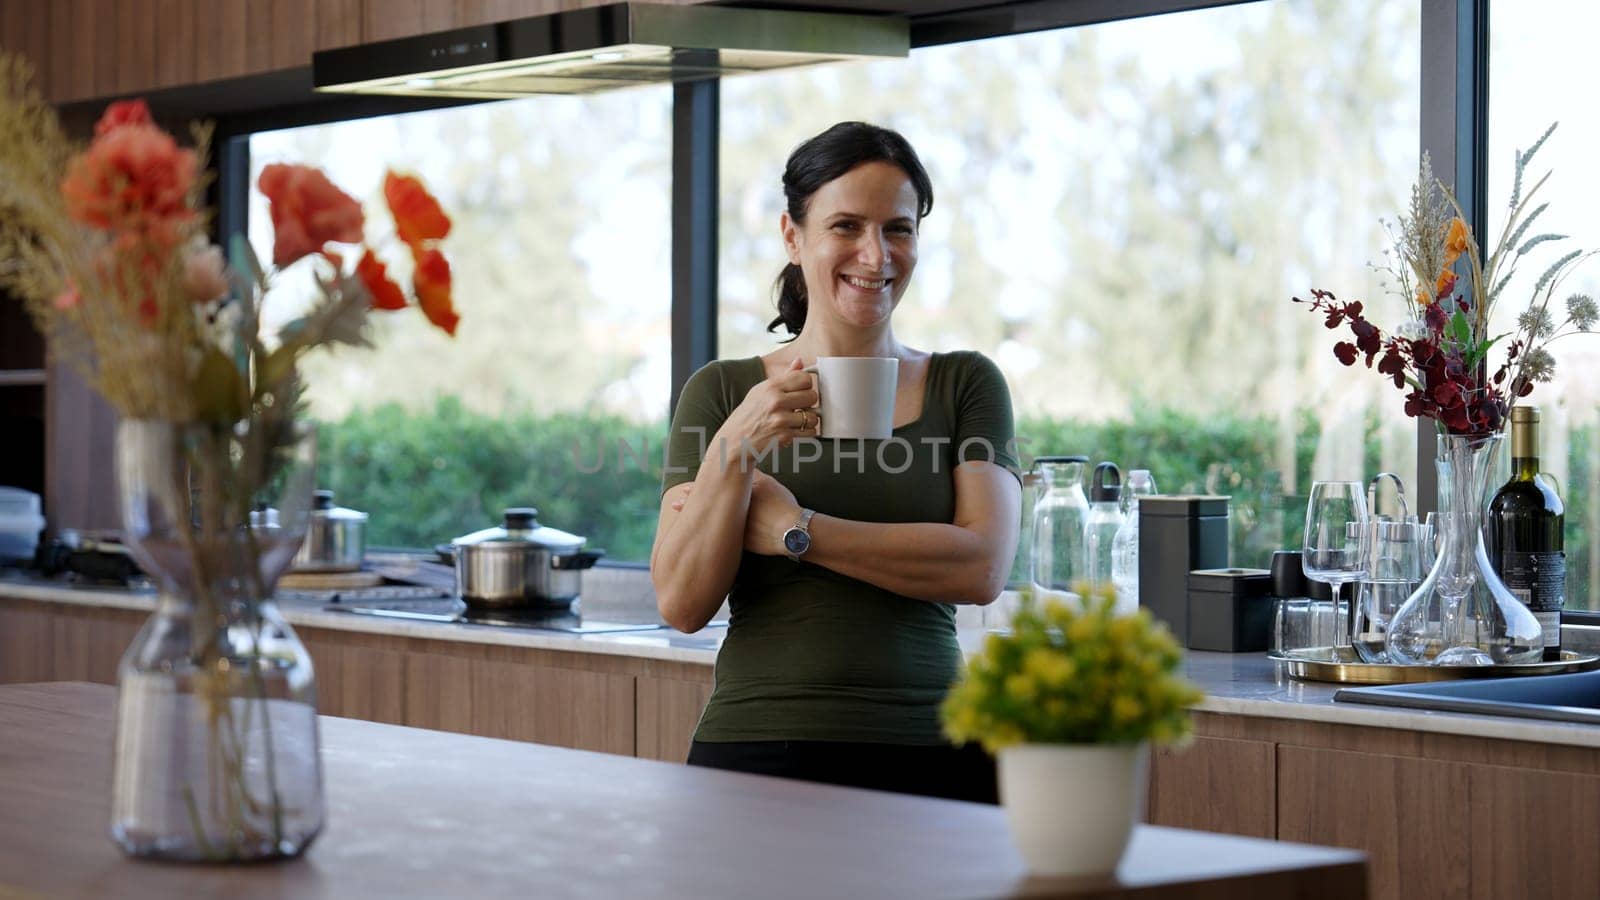 Happy old grandmother confidently standing pose while look at camera for good event or anniversary in kitchen. Cheerful senior enjoy retirement life with beautiful kitchenware and house. Divergence.